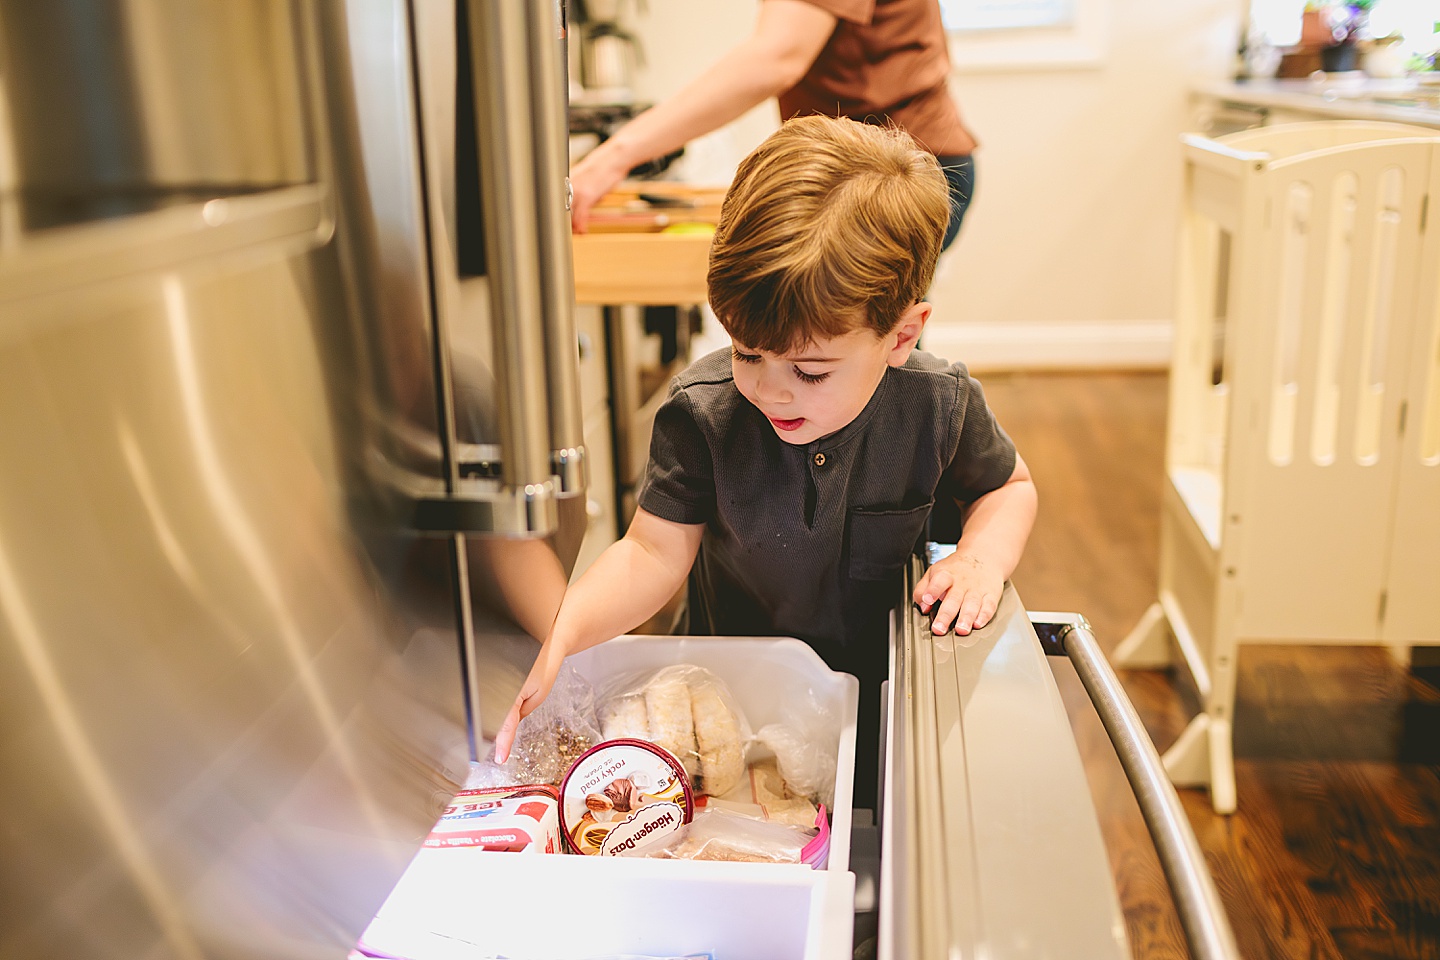 Toddler looking through the freezer for ice cream